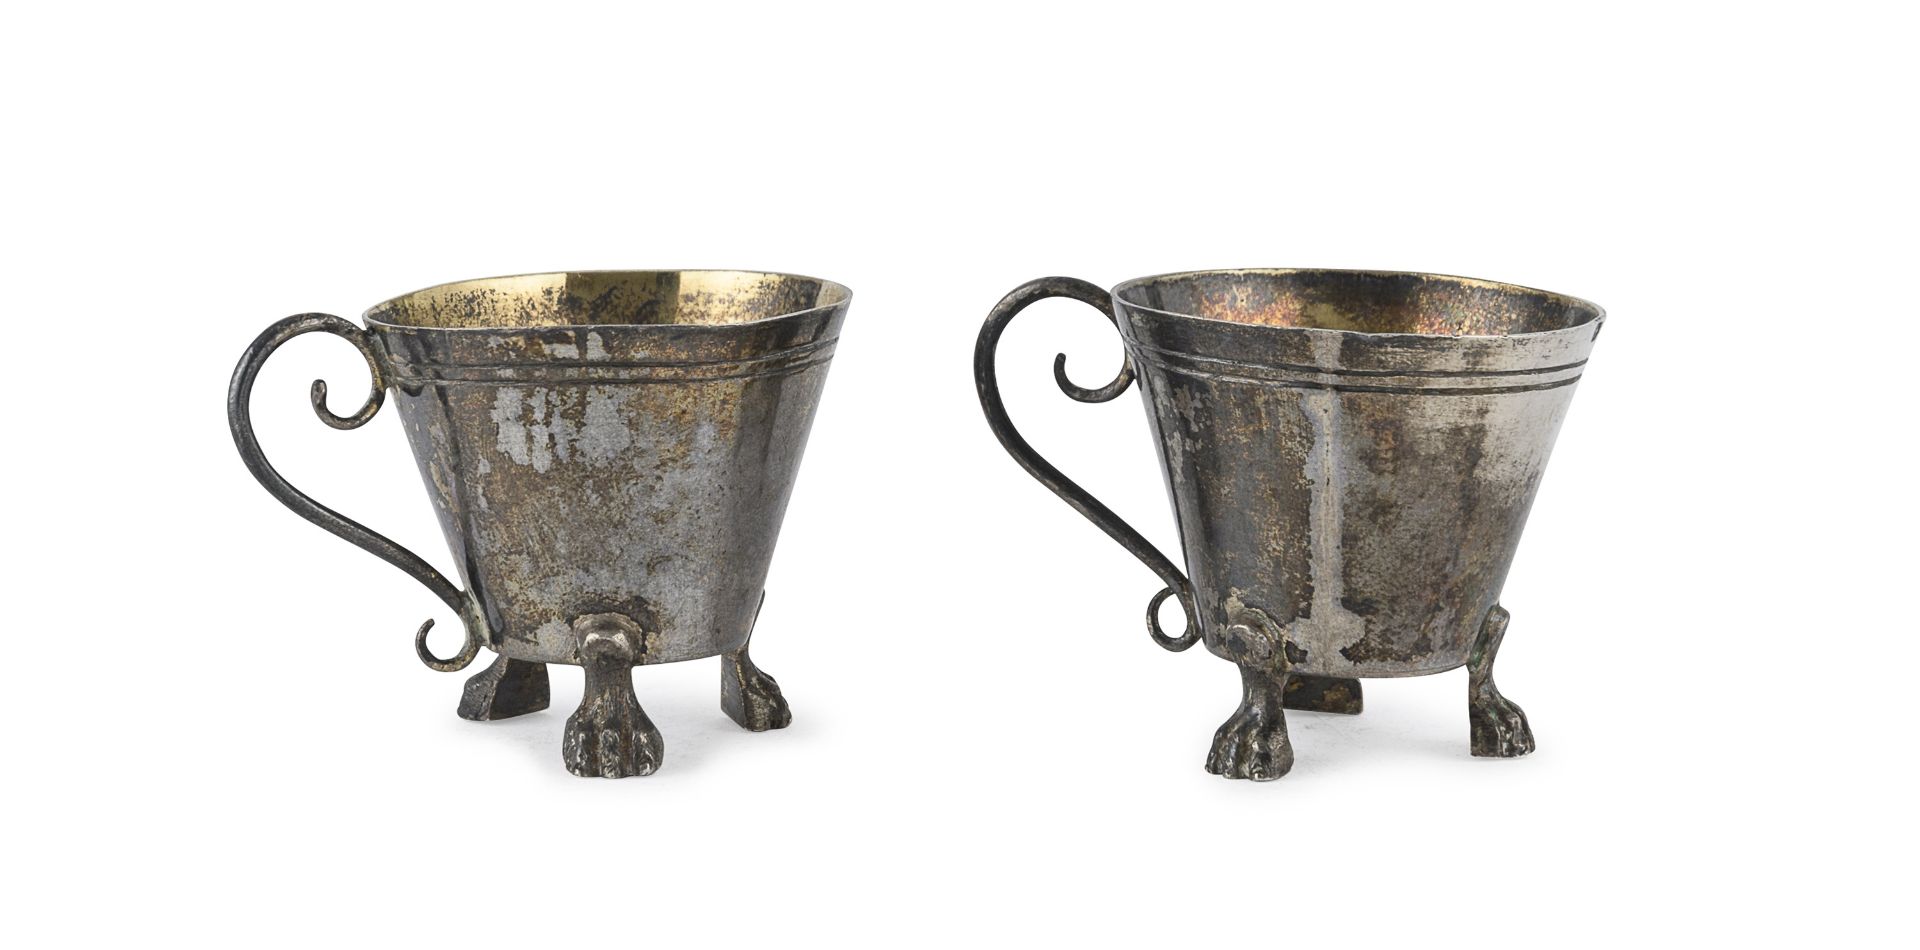 PAIR OF SMALL SILVER BEAKERS ROME PAPAL STATES 1809